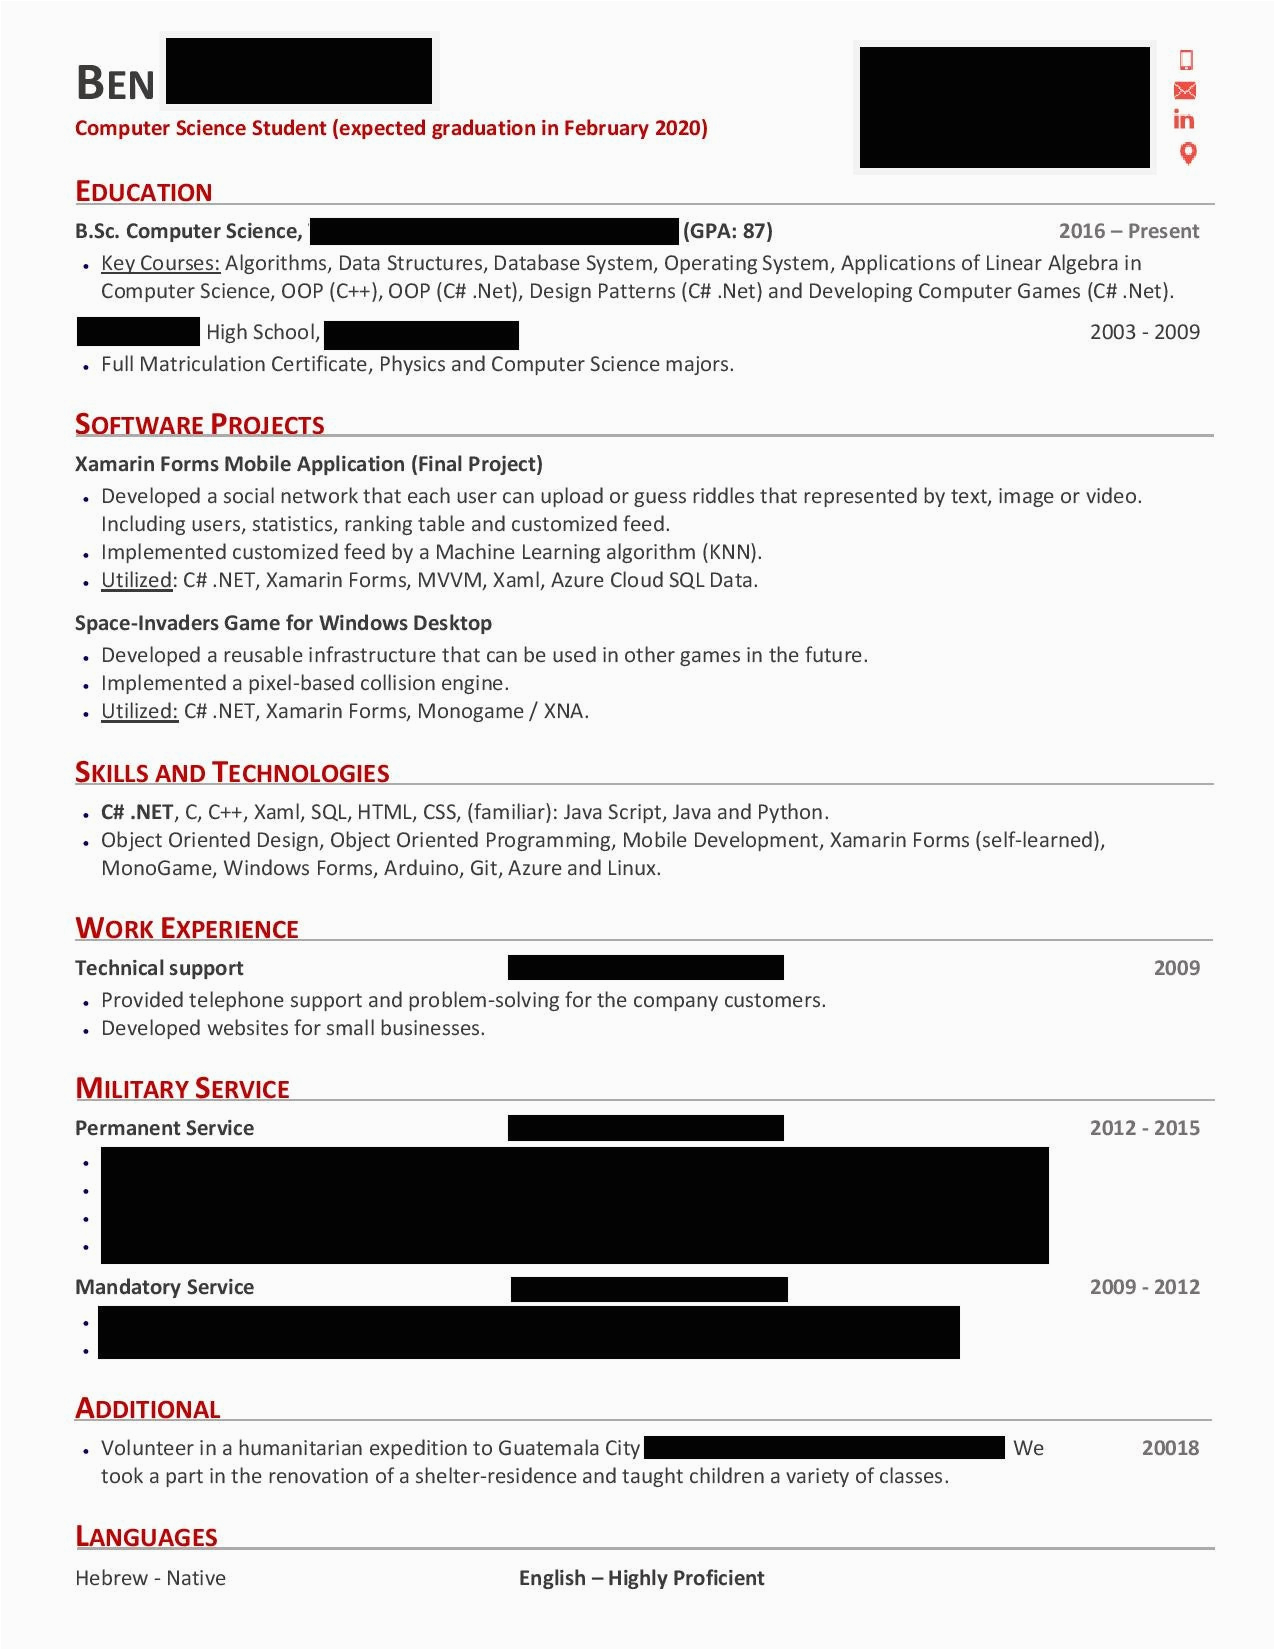 Sample Resume for Computer Science Fresh Graduate Reddit Fresh Puter Science Graduate Resume Resumes